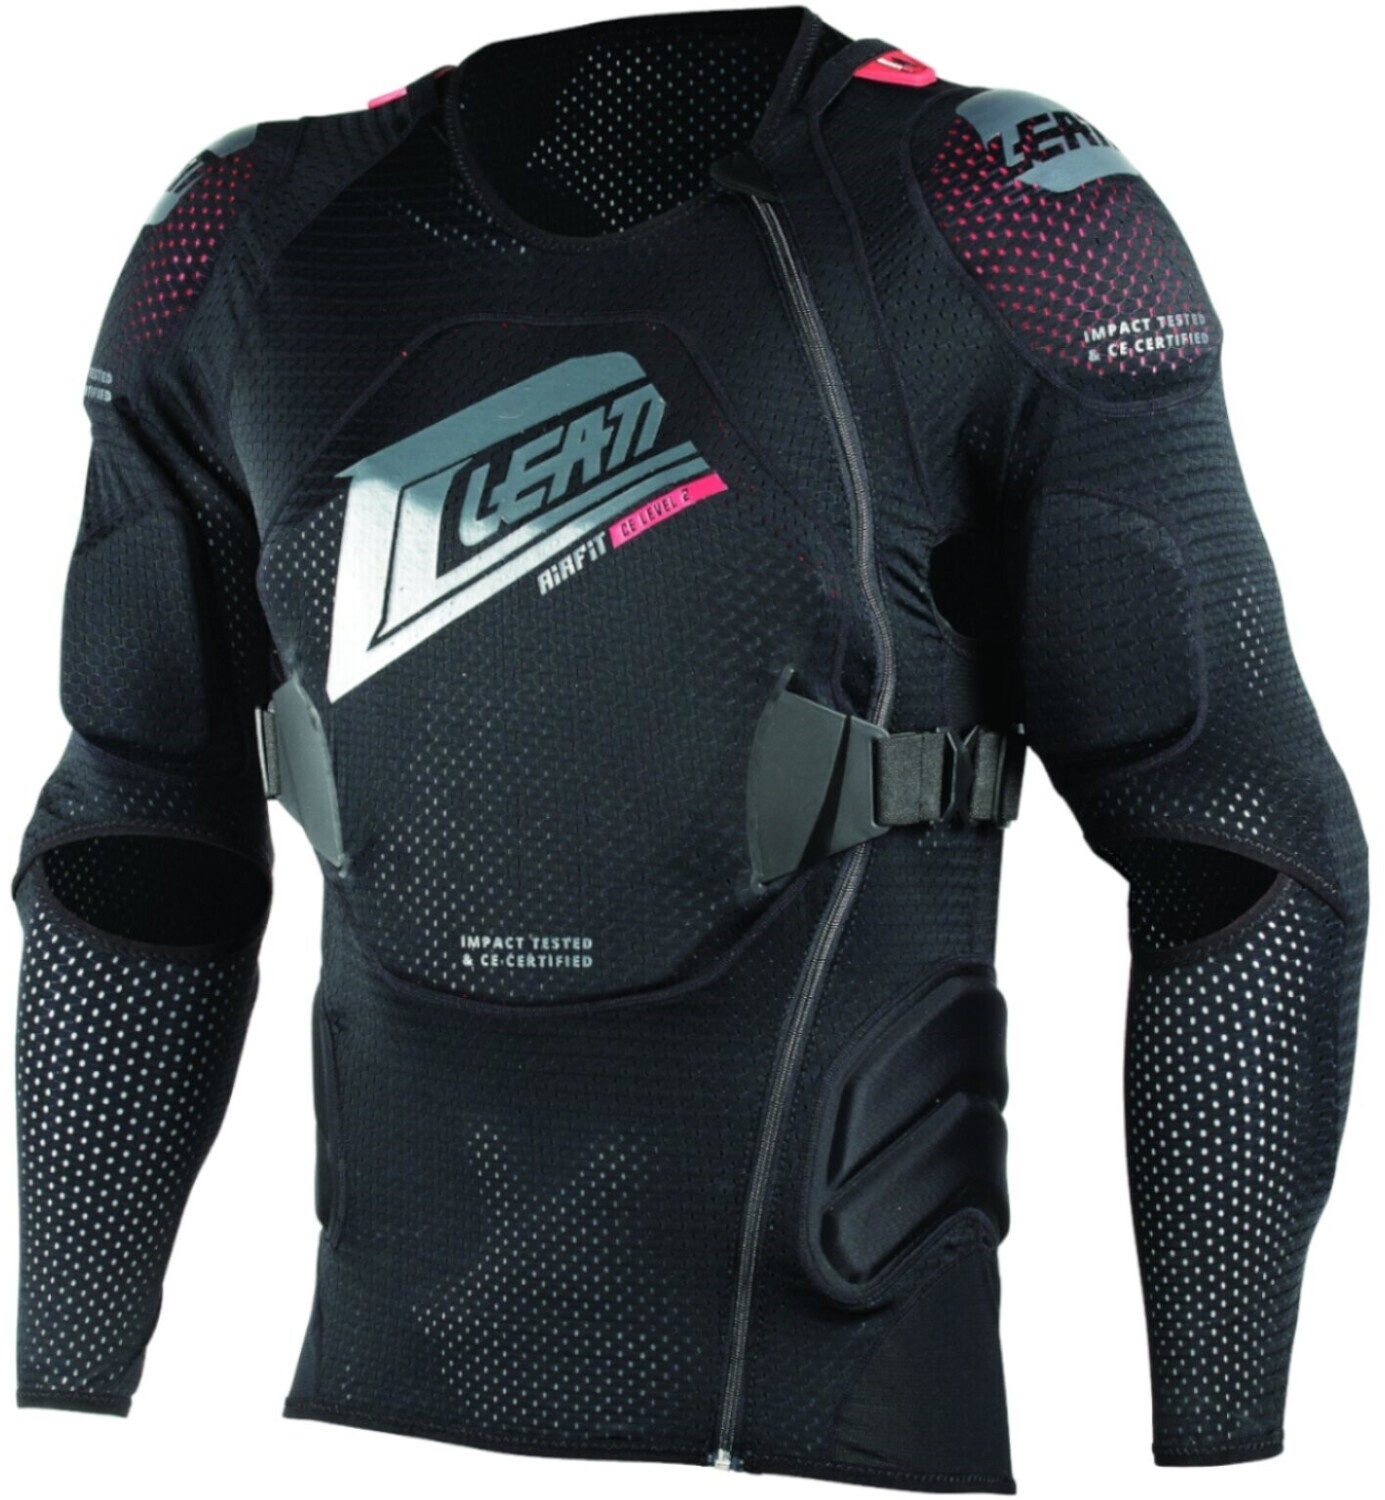 Photos - Motorcycle Clothing Leatt Body Protector 3DF Airfit 